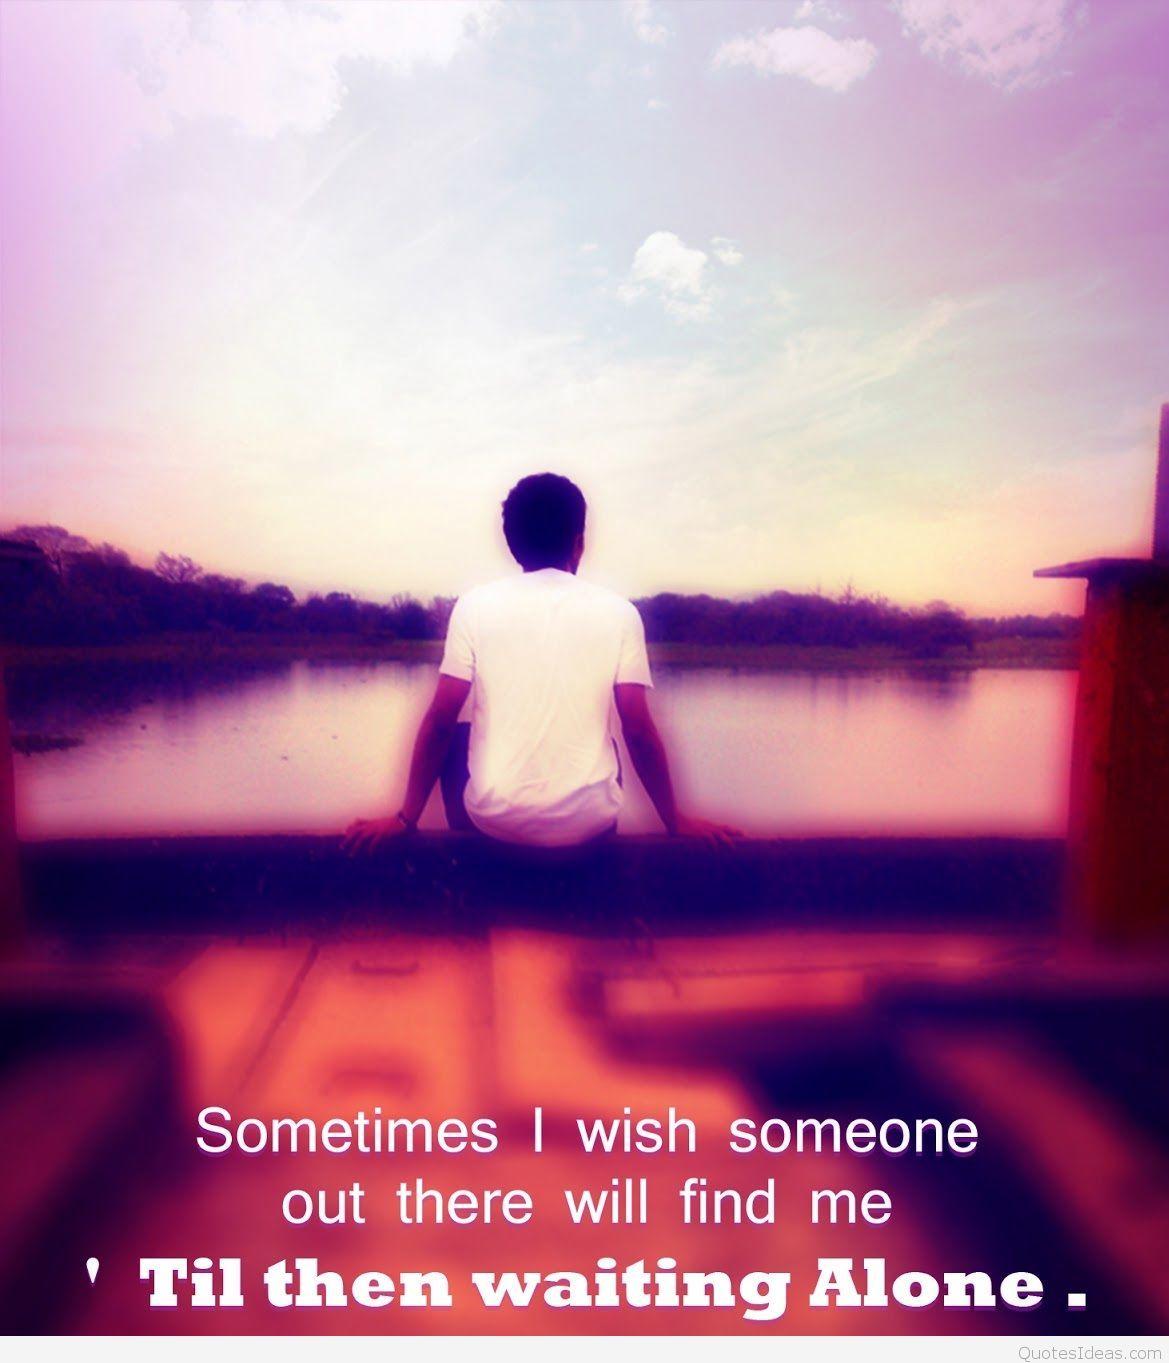 Sad alone boy wallpaper image with quotes